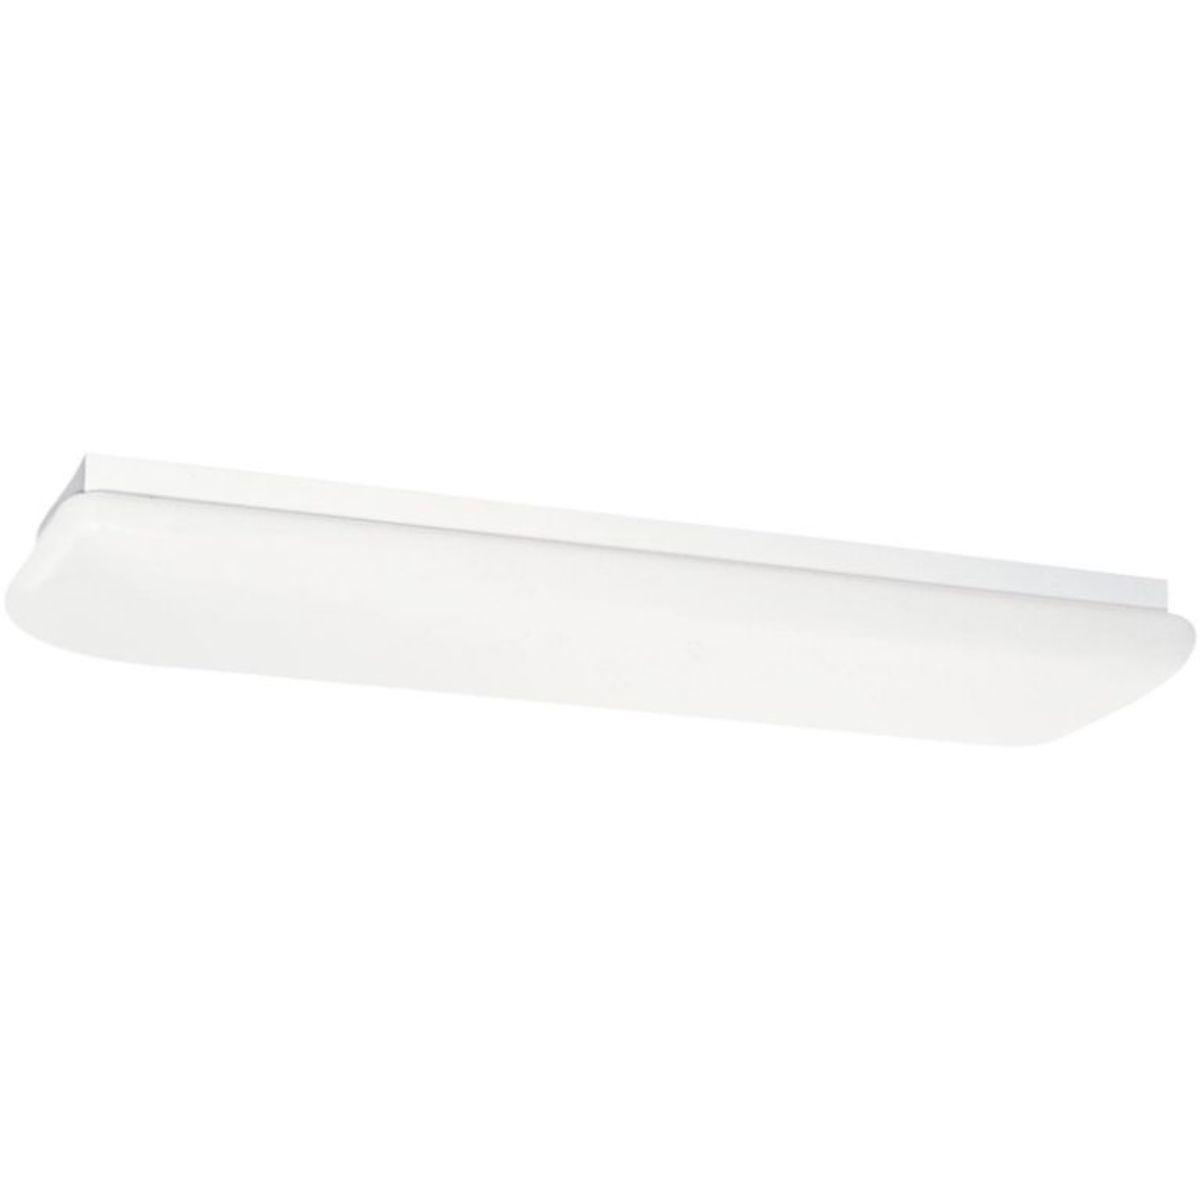 Fluorescent 52 in 2 Lights Ceiling Puff Light White Finish